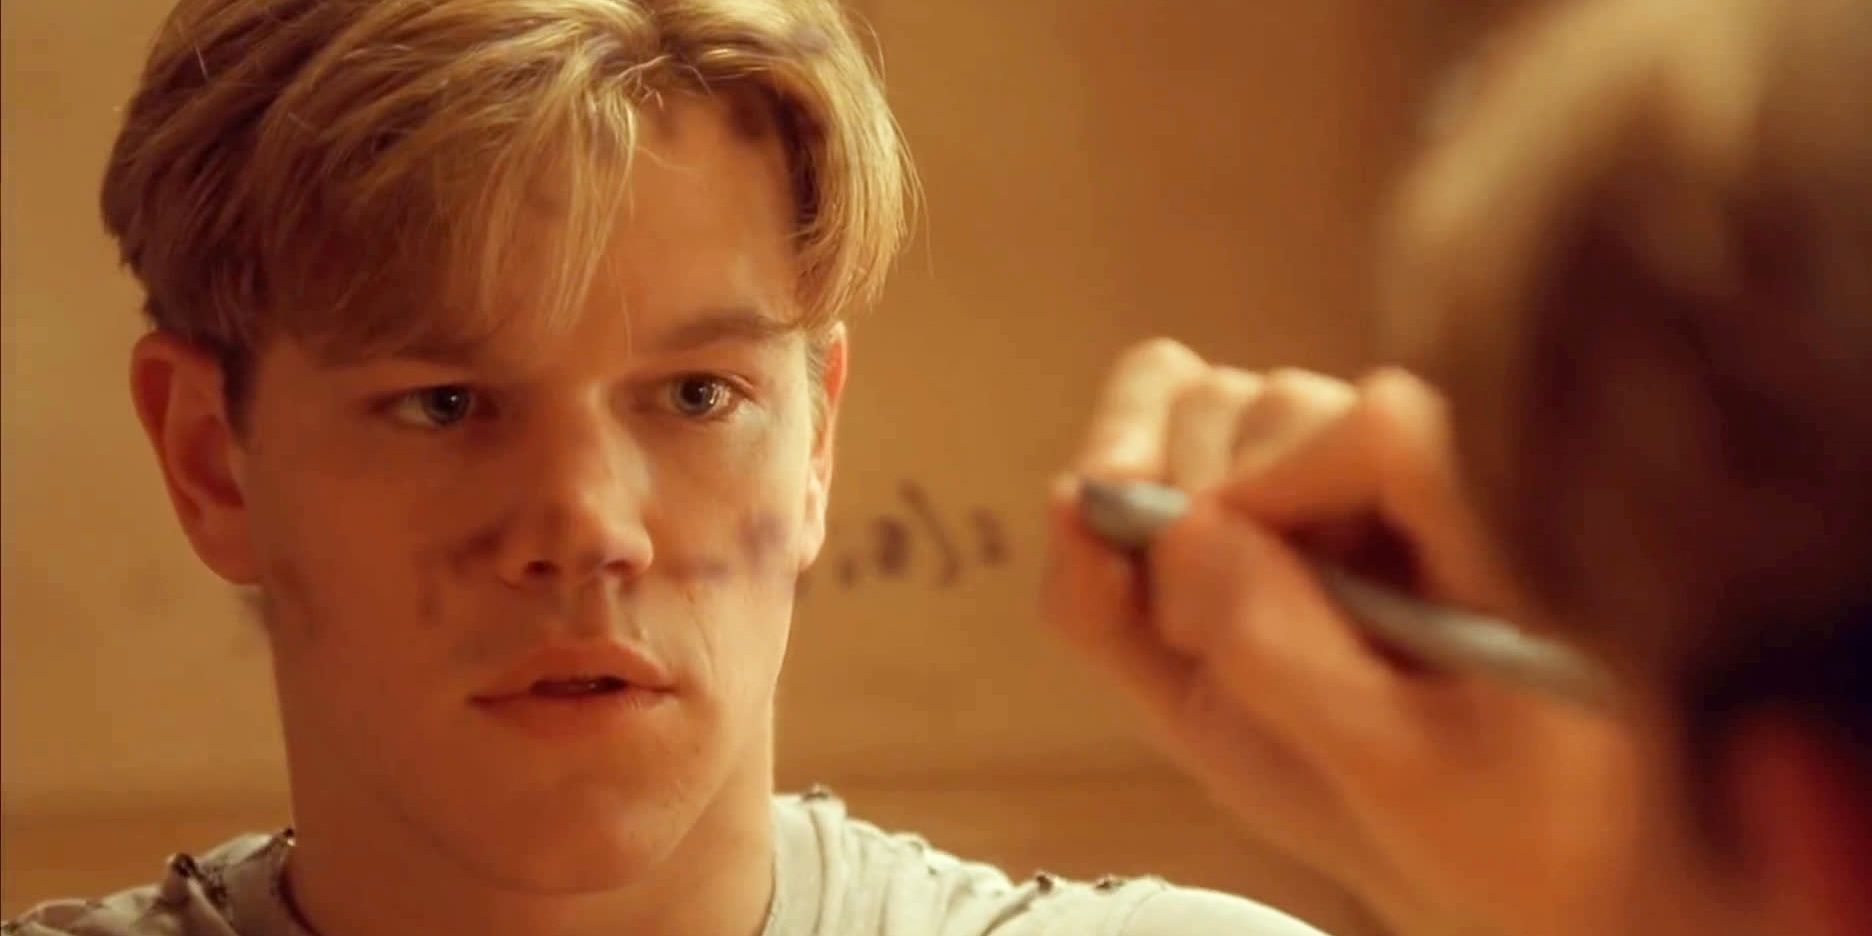 10 Best Movies About Young Geniuses